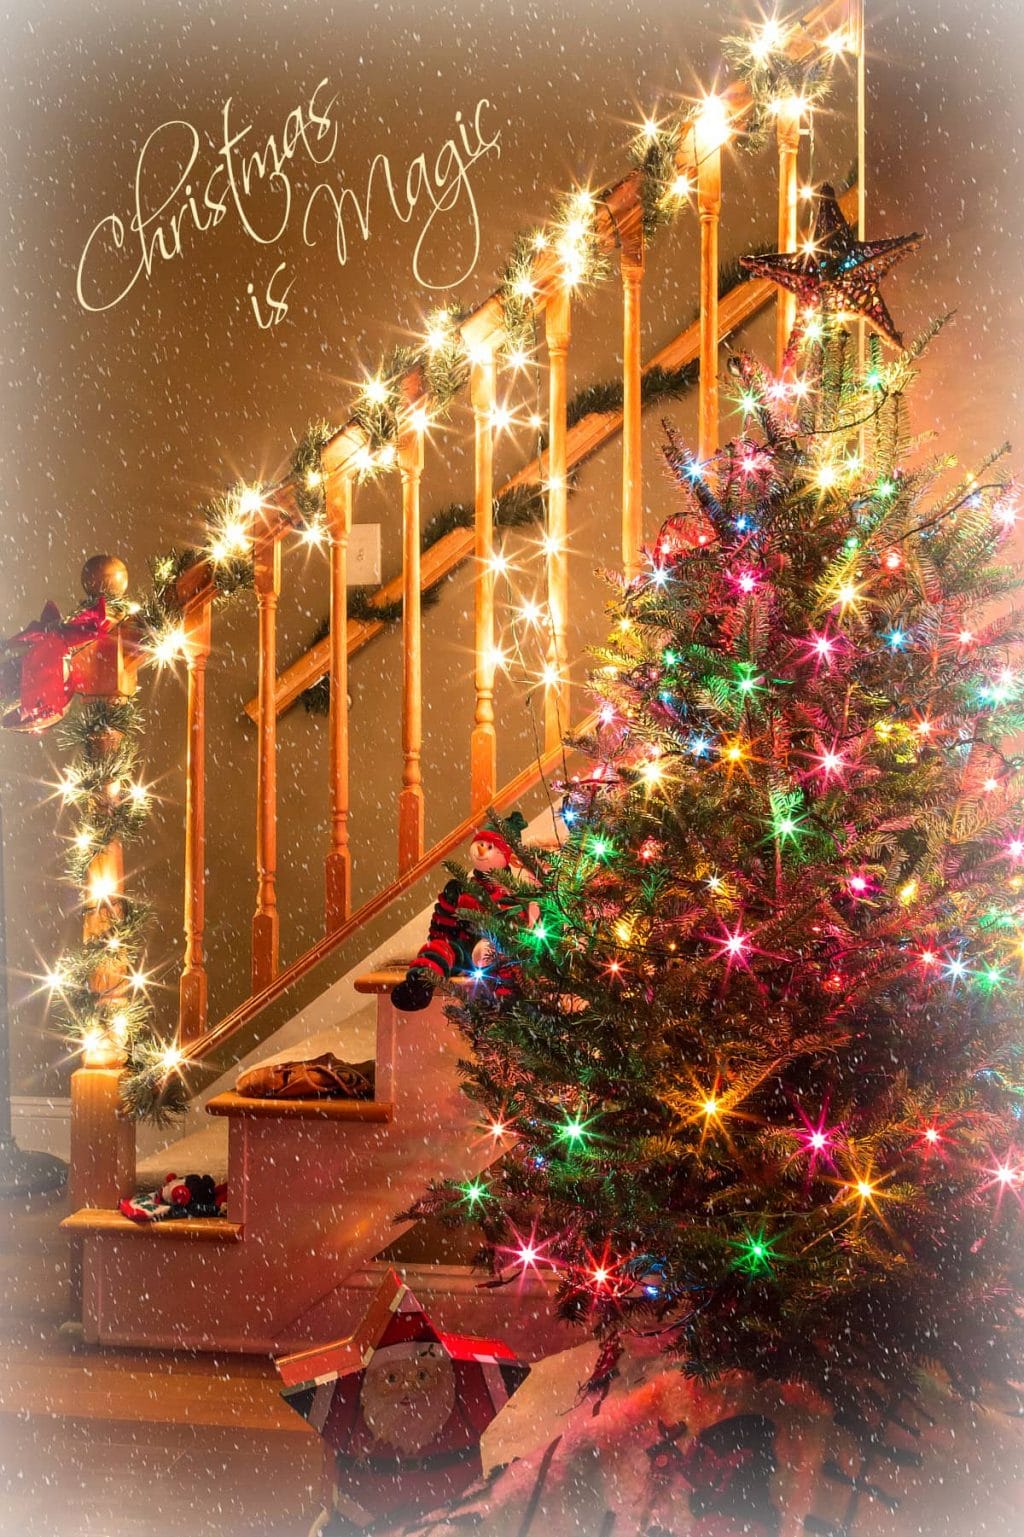 Christmas is Magic image with white fairy lights wrapped around a stair banister, and a lit Christmas tree.